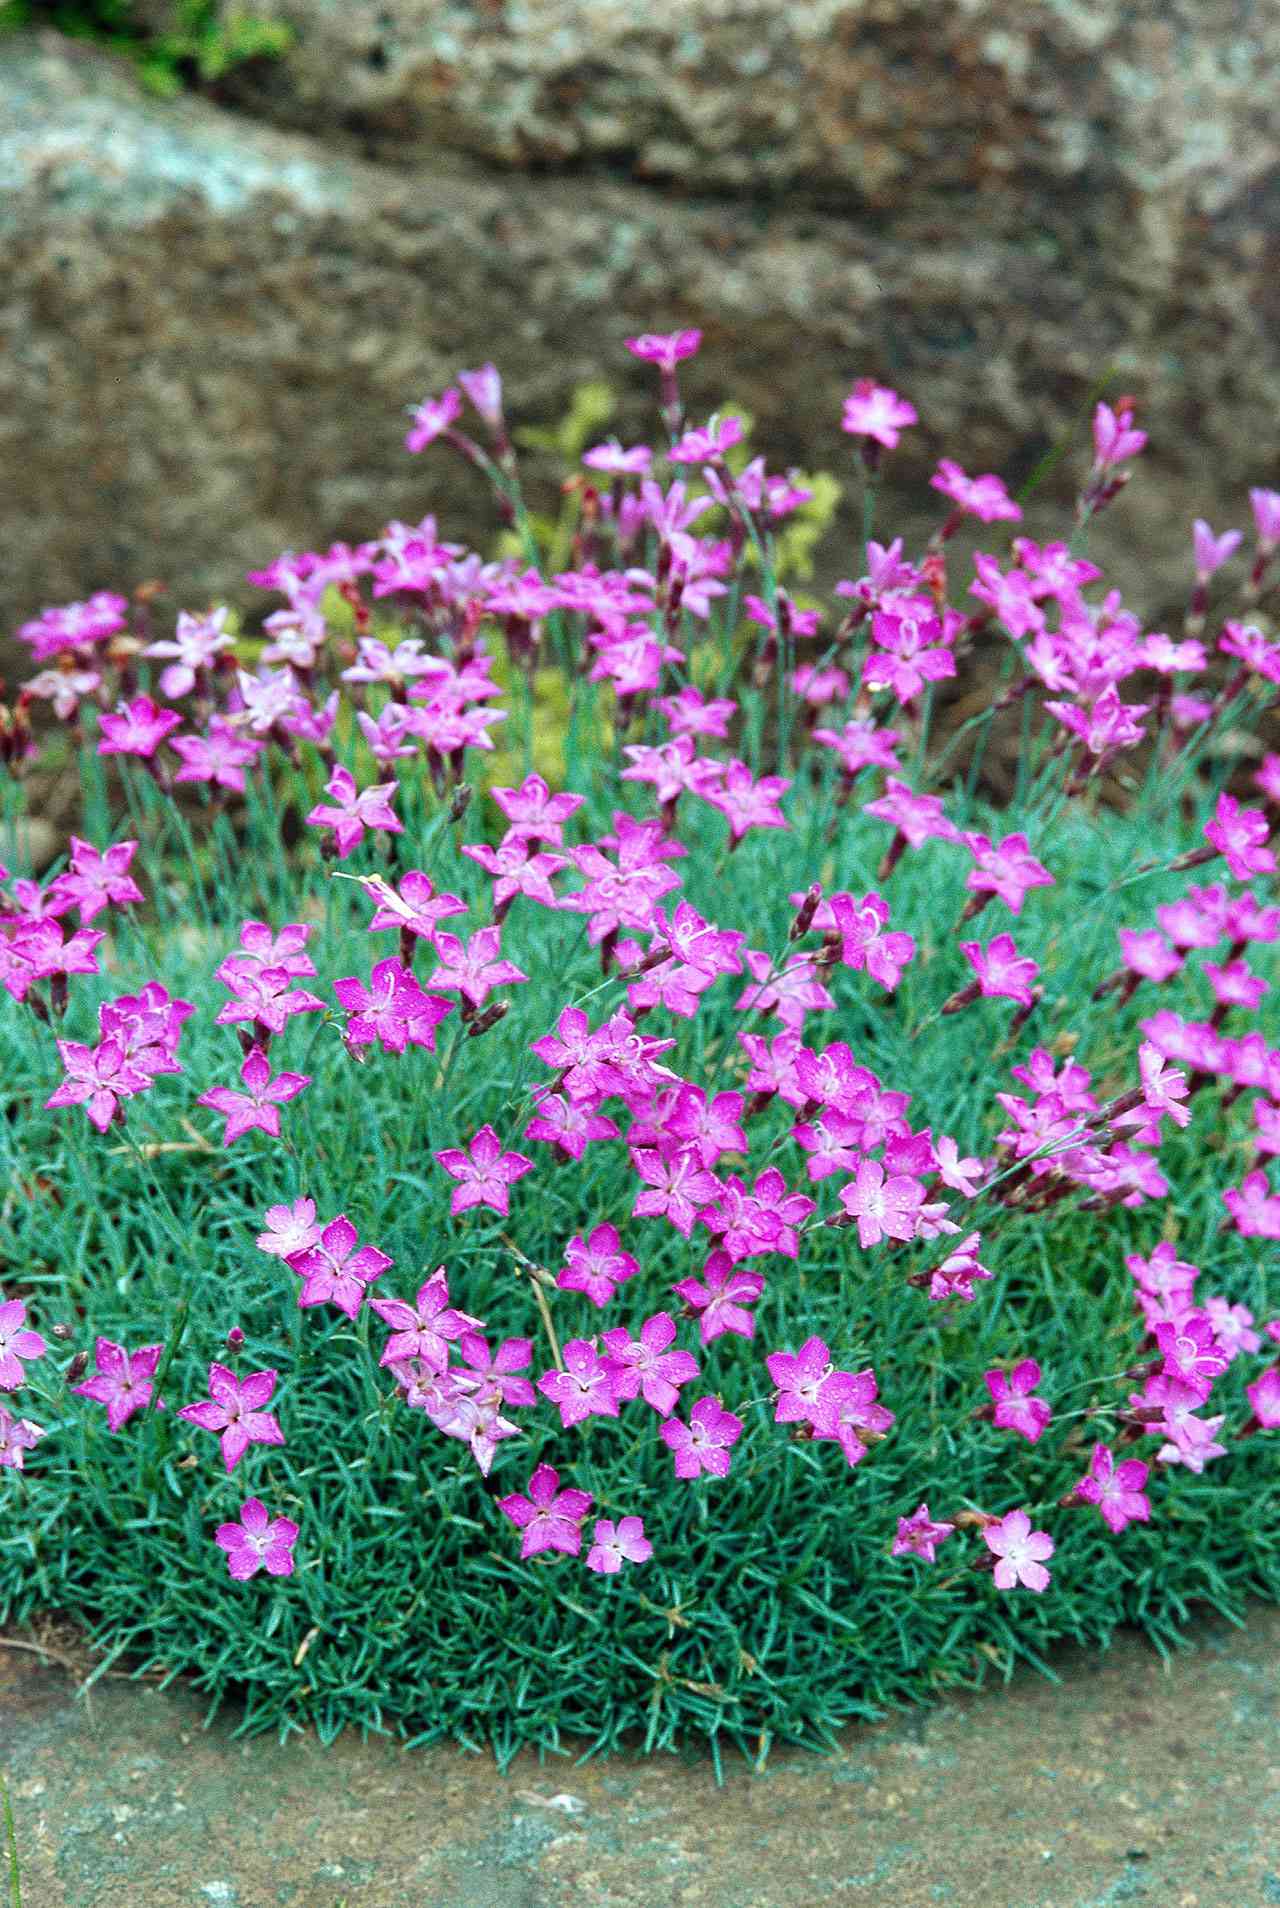 Drought Tolerant Groundcovers Better, Fastest Growing Drought Tolerant Ground Cover